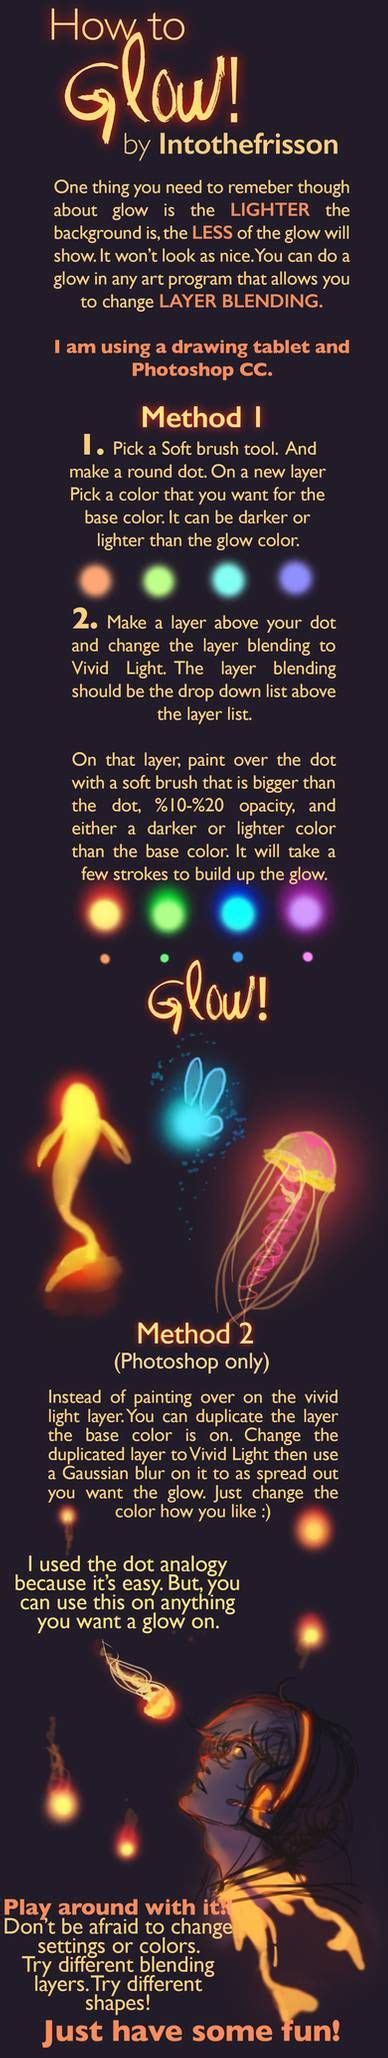 How To Glow Tutorial On Glowing By Intothefrisson On Deviantart